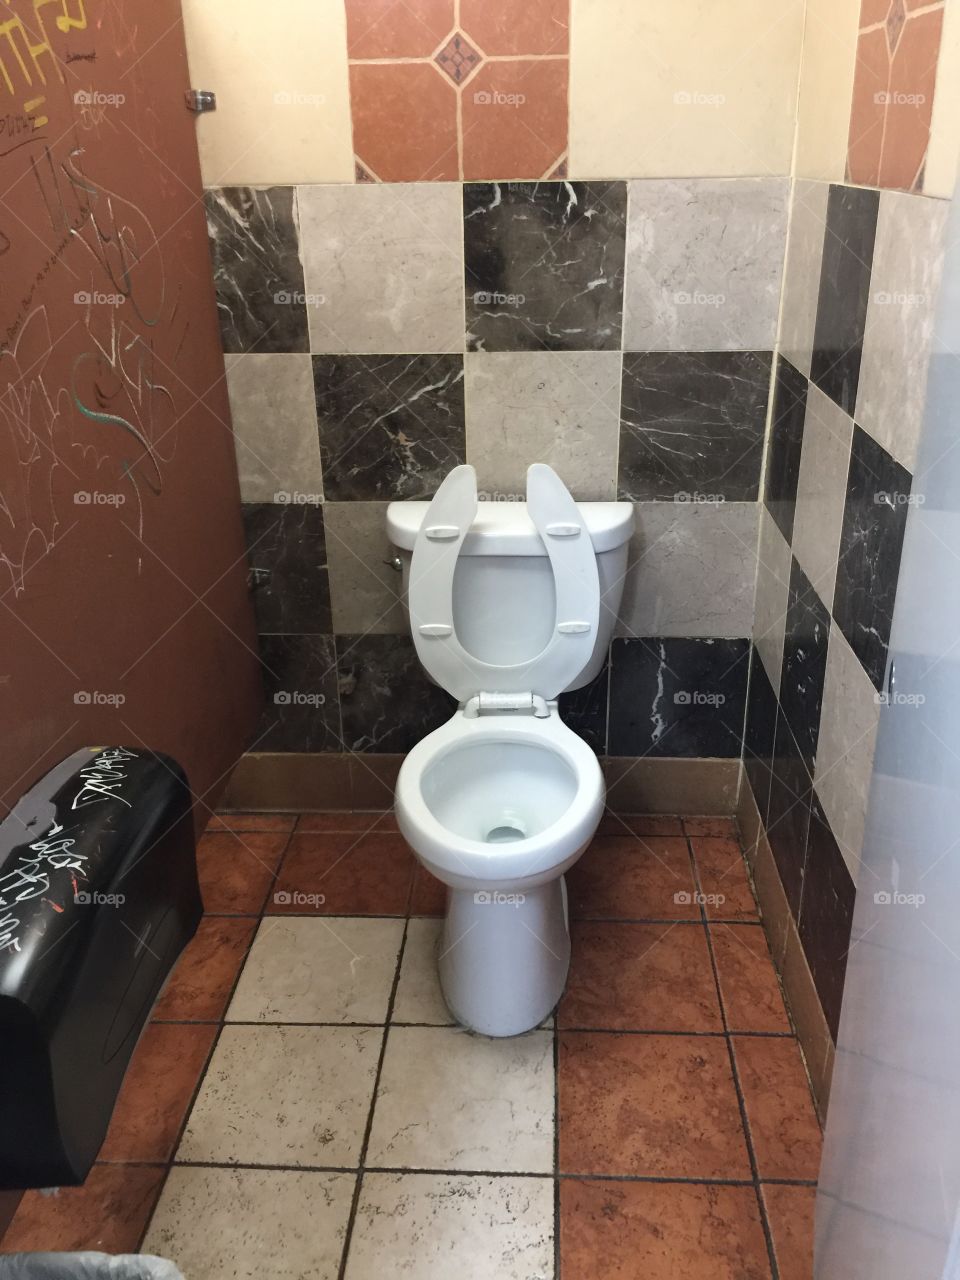 A men's room toilet with graffiti and tile flooring.